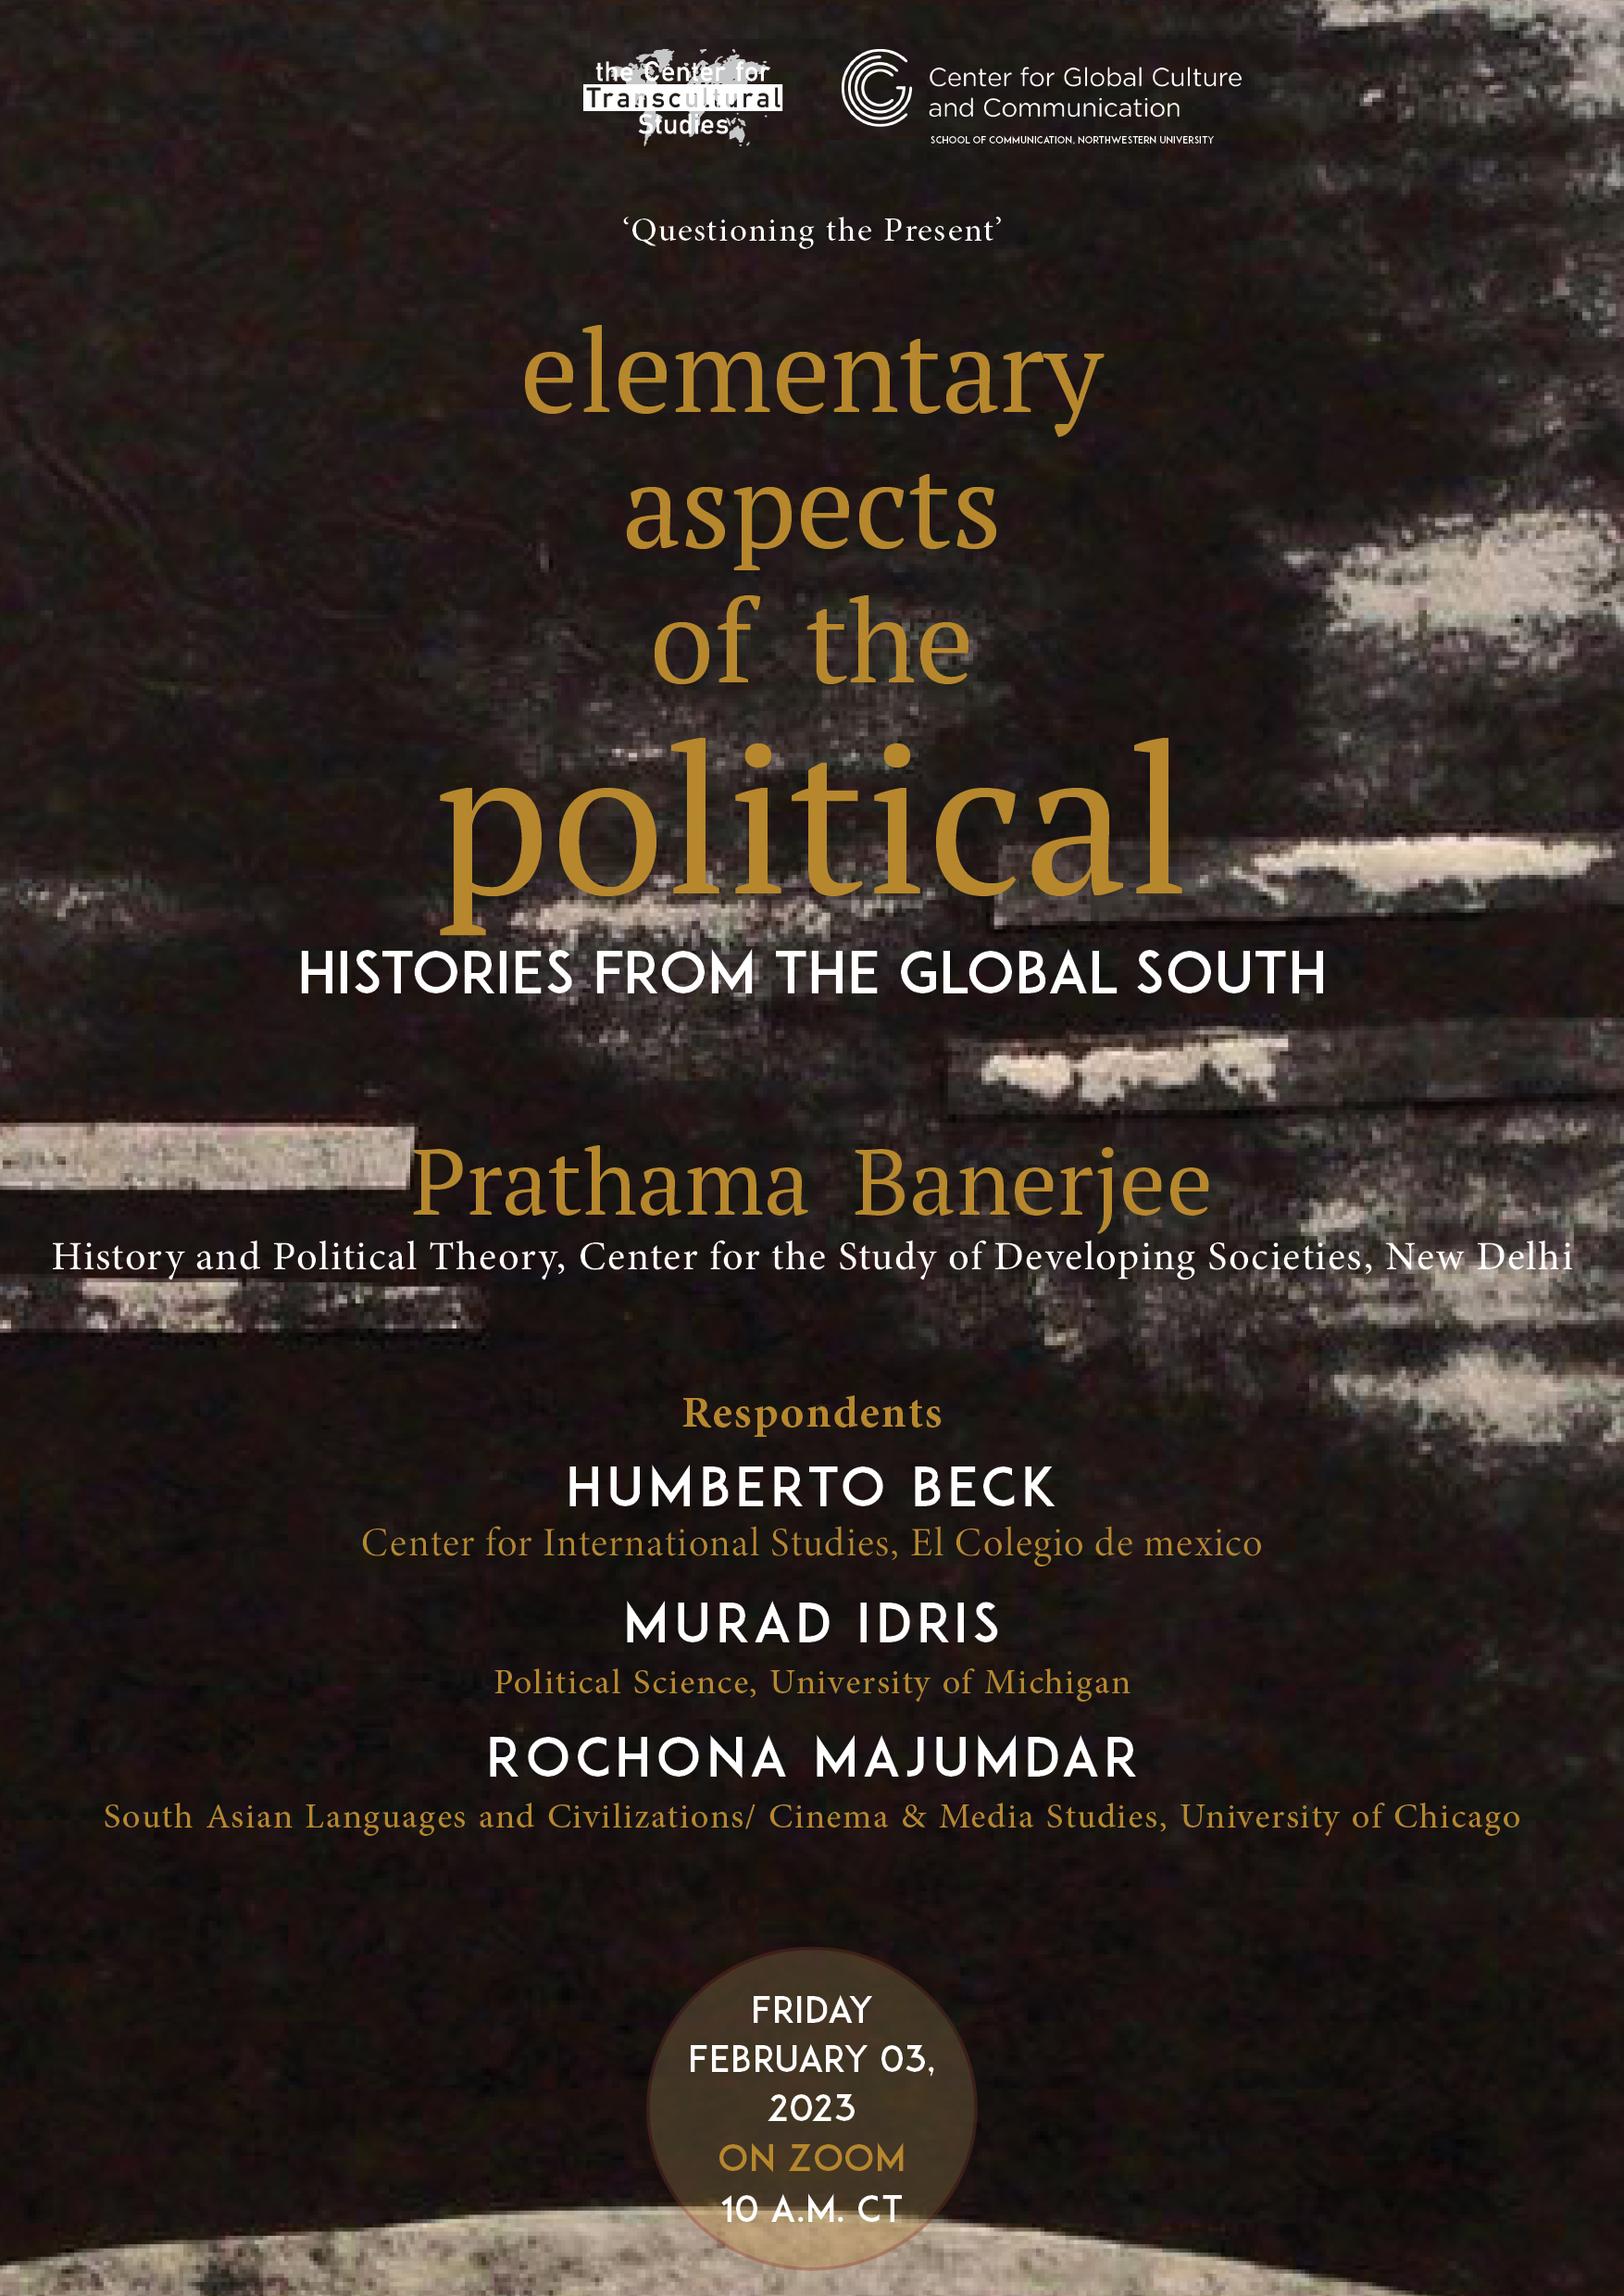 Elementary Aspects of the Political: Histories from the Global South